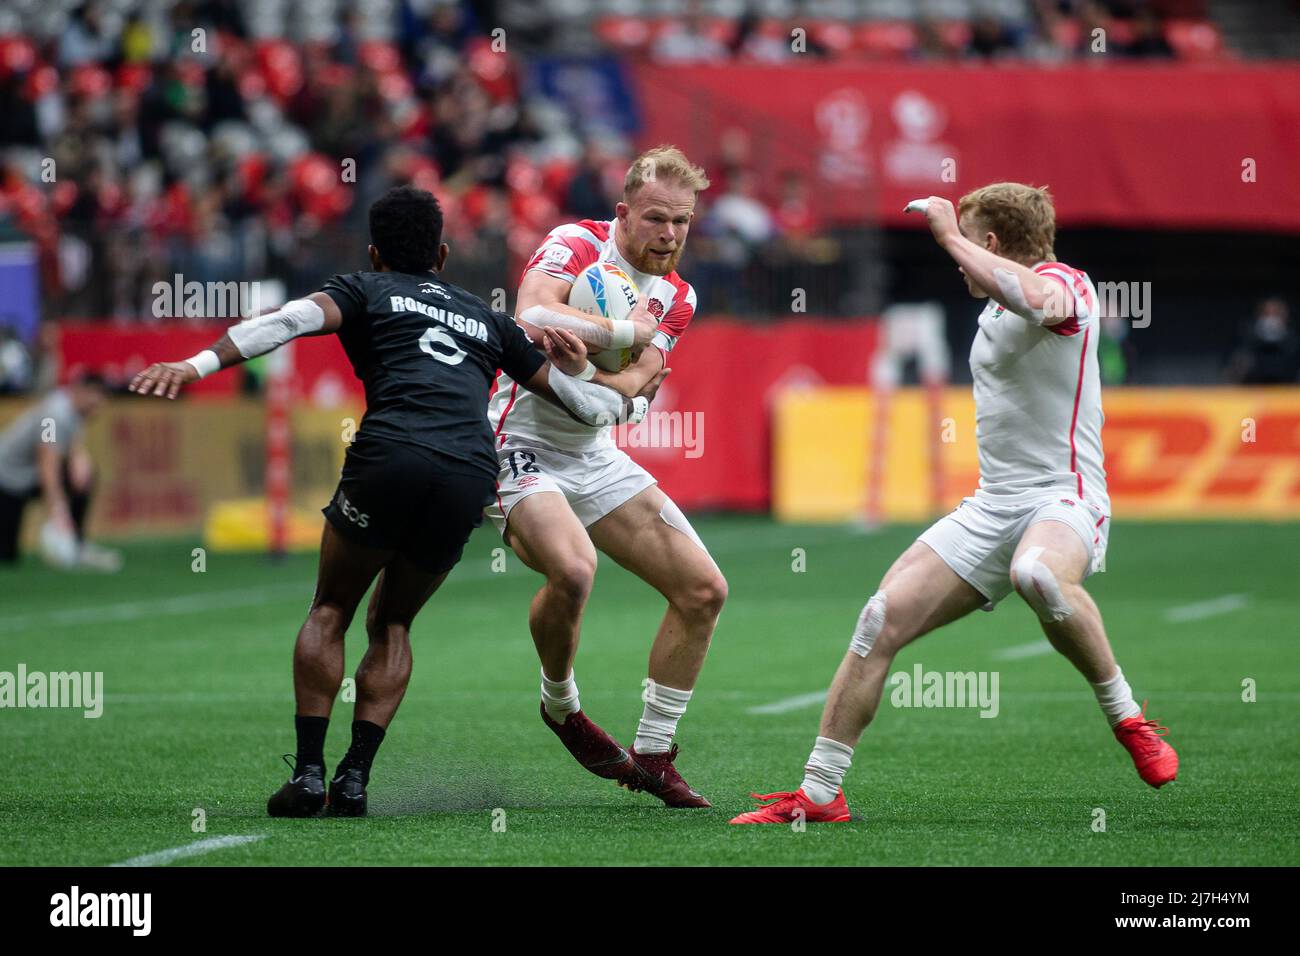 Vancouver, Canada, April 17, 2022: Will Homer (middle, holding ball) of Team England 7s in action against Akuila Rokolisoa (left) of Team New Zealand 7s during Day 2 of the HSBC Canada Sevens at BC Place in Vancouver, Canada. New Zealand won the match with the score 34-5. Stock Photo